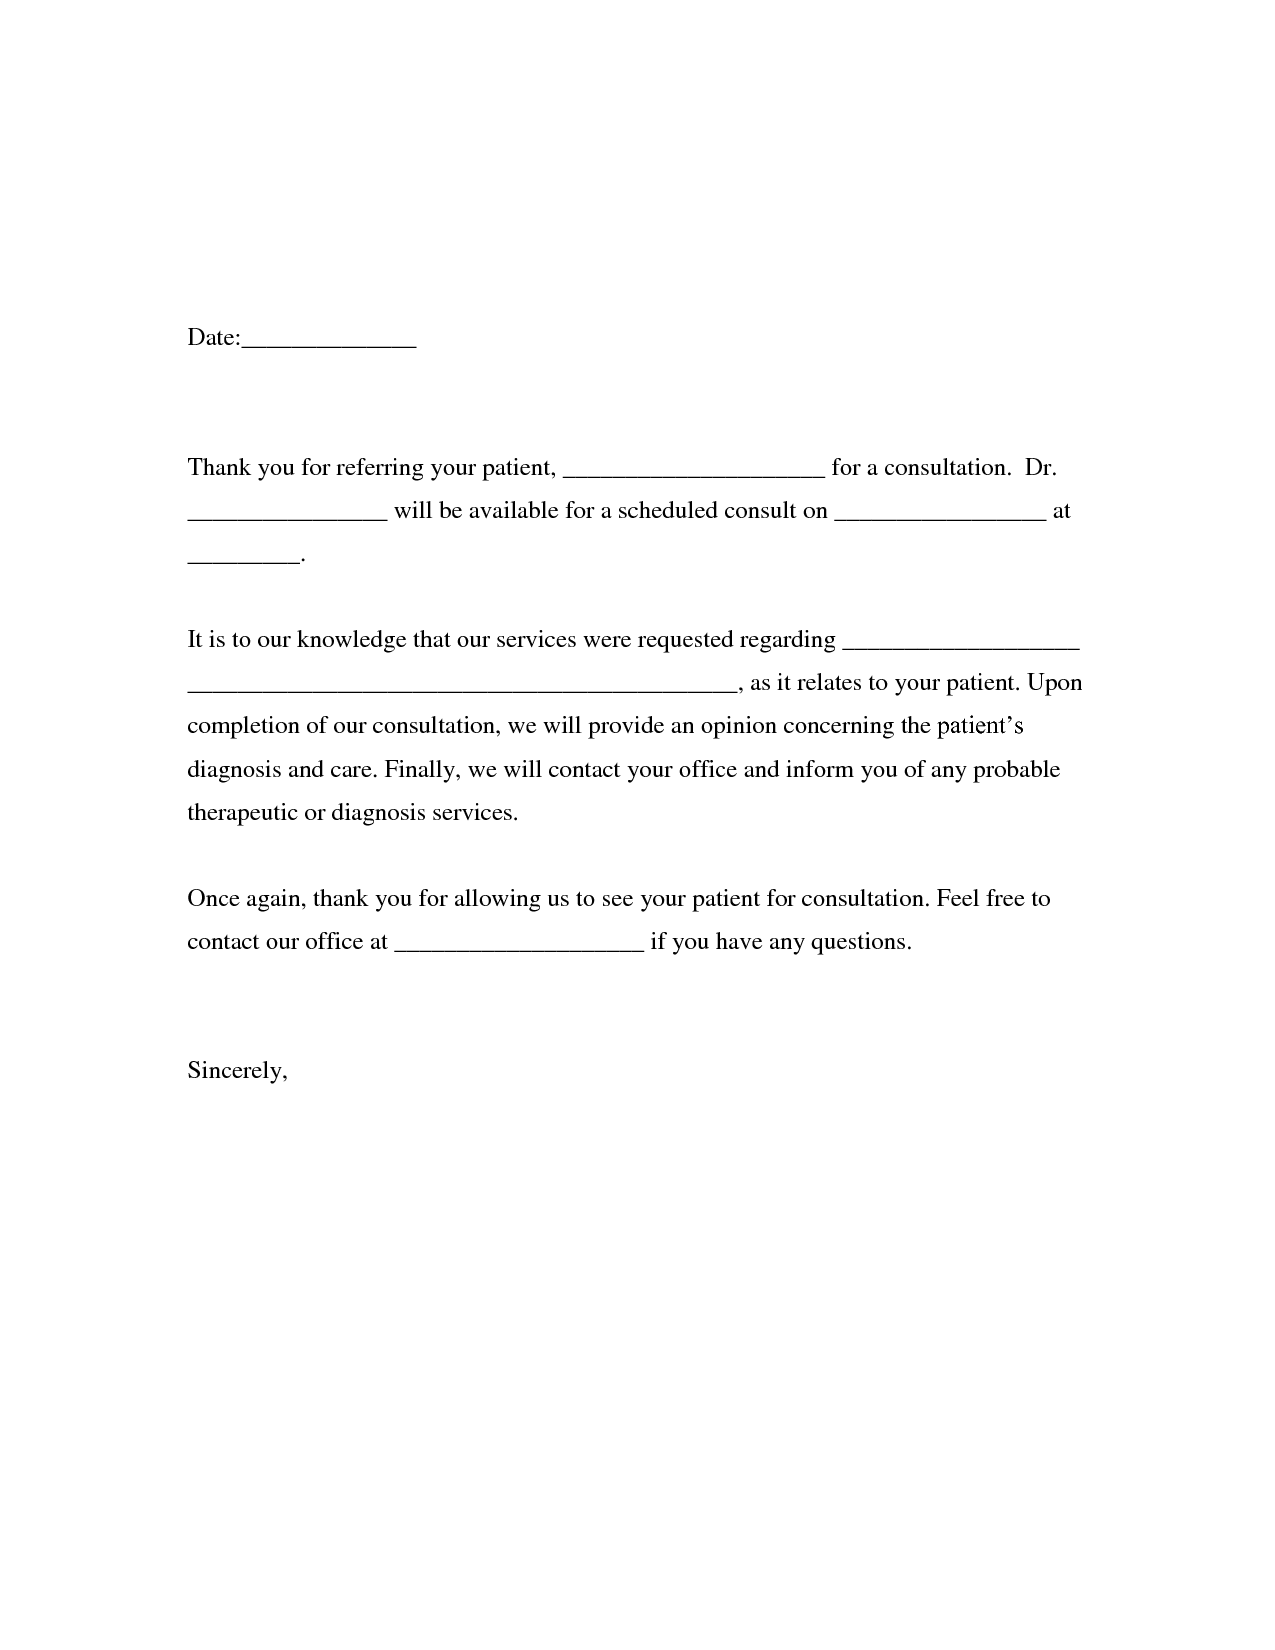 Thank You For Your Referral Letter Sample Gallery Letter Format 